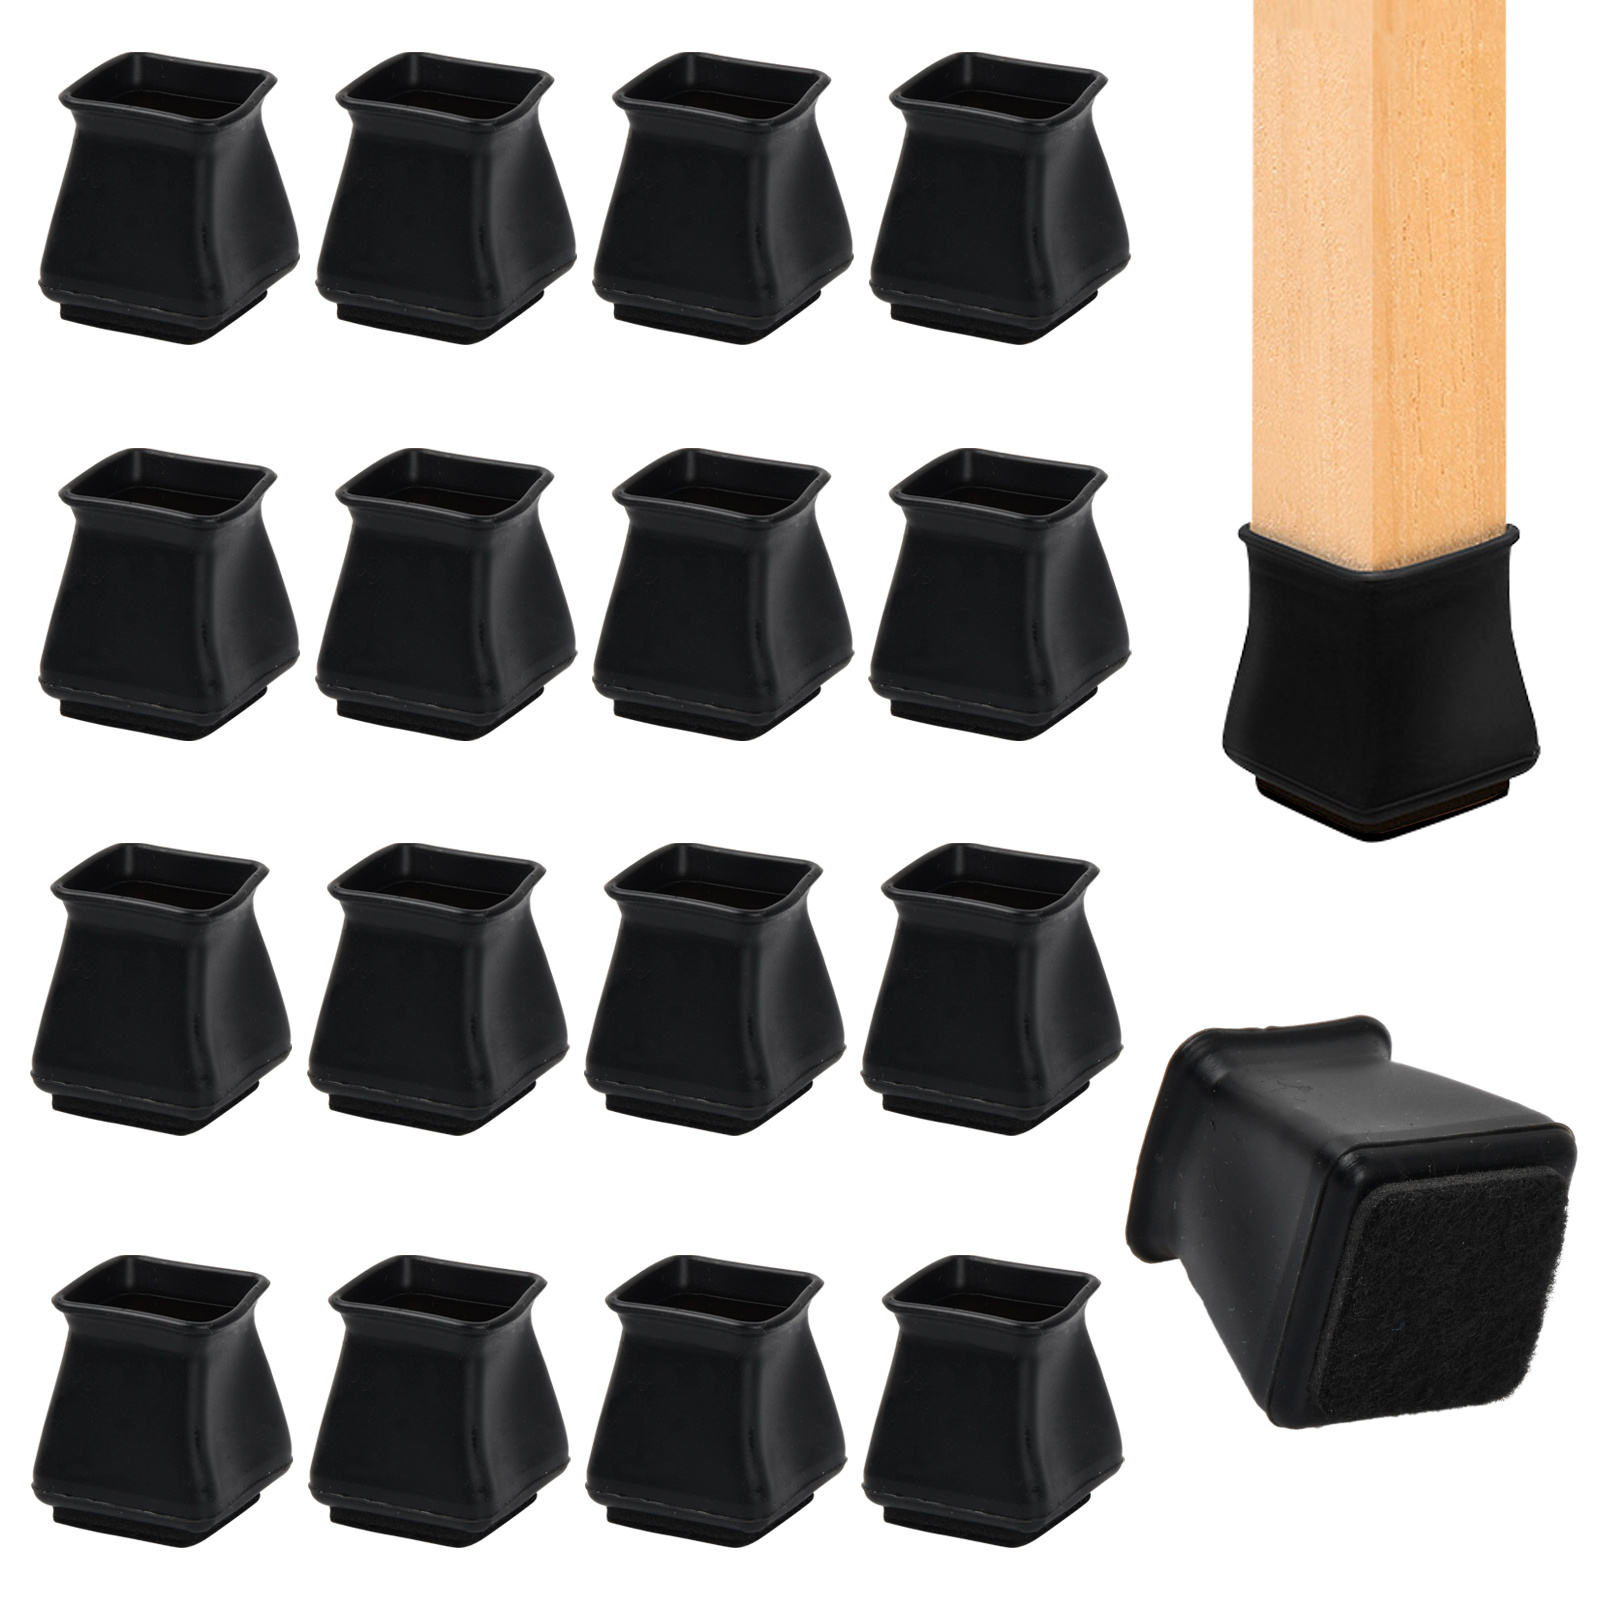 

16 Pcs Tpr Chair Leg Floor Protectors With Felt Bottom, Irregular Shape Furniture Caps, Anti-slip Protection Covers For Hardwood Floors, Scratch Resistant Square Chair Leg Covers (22-28mm Black)